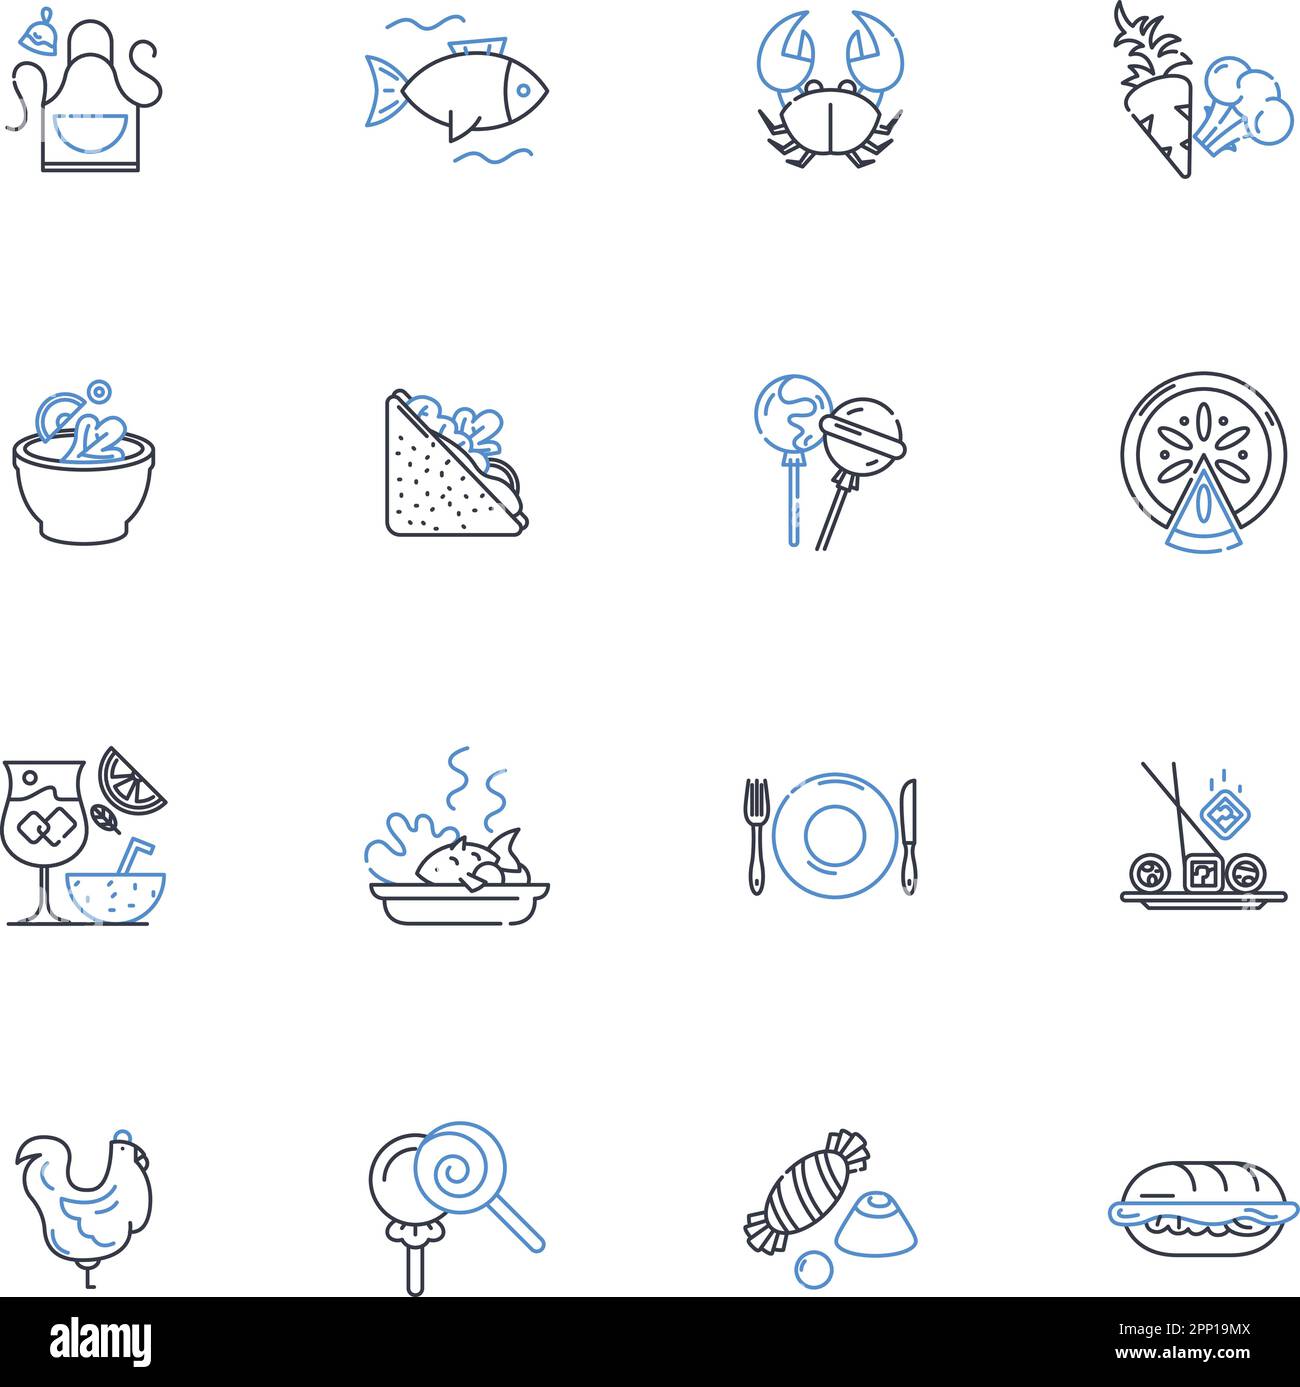 Snacking line icons collection. Nibbling, Munching, Grazing, Bingeing, Chomping, Devouring, Chewing vector and linear illustration. Morseling,Noshing Stock Vector